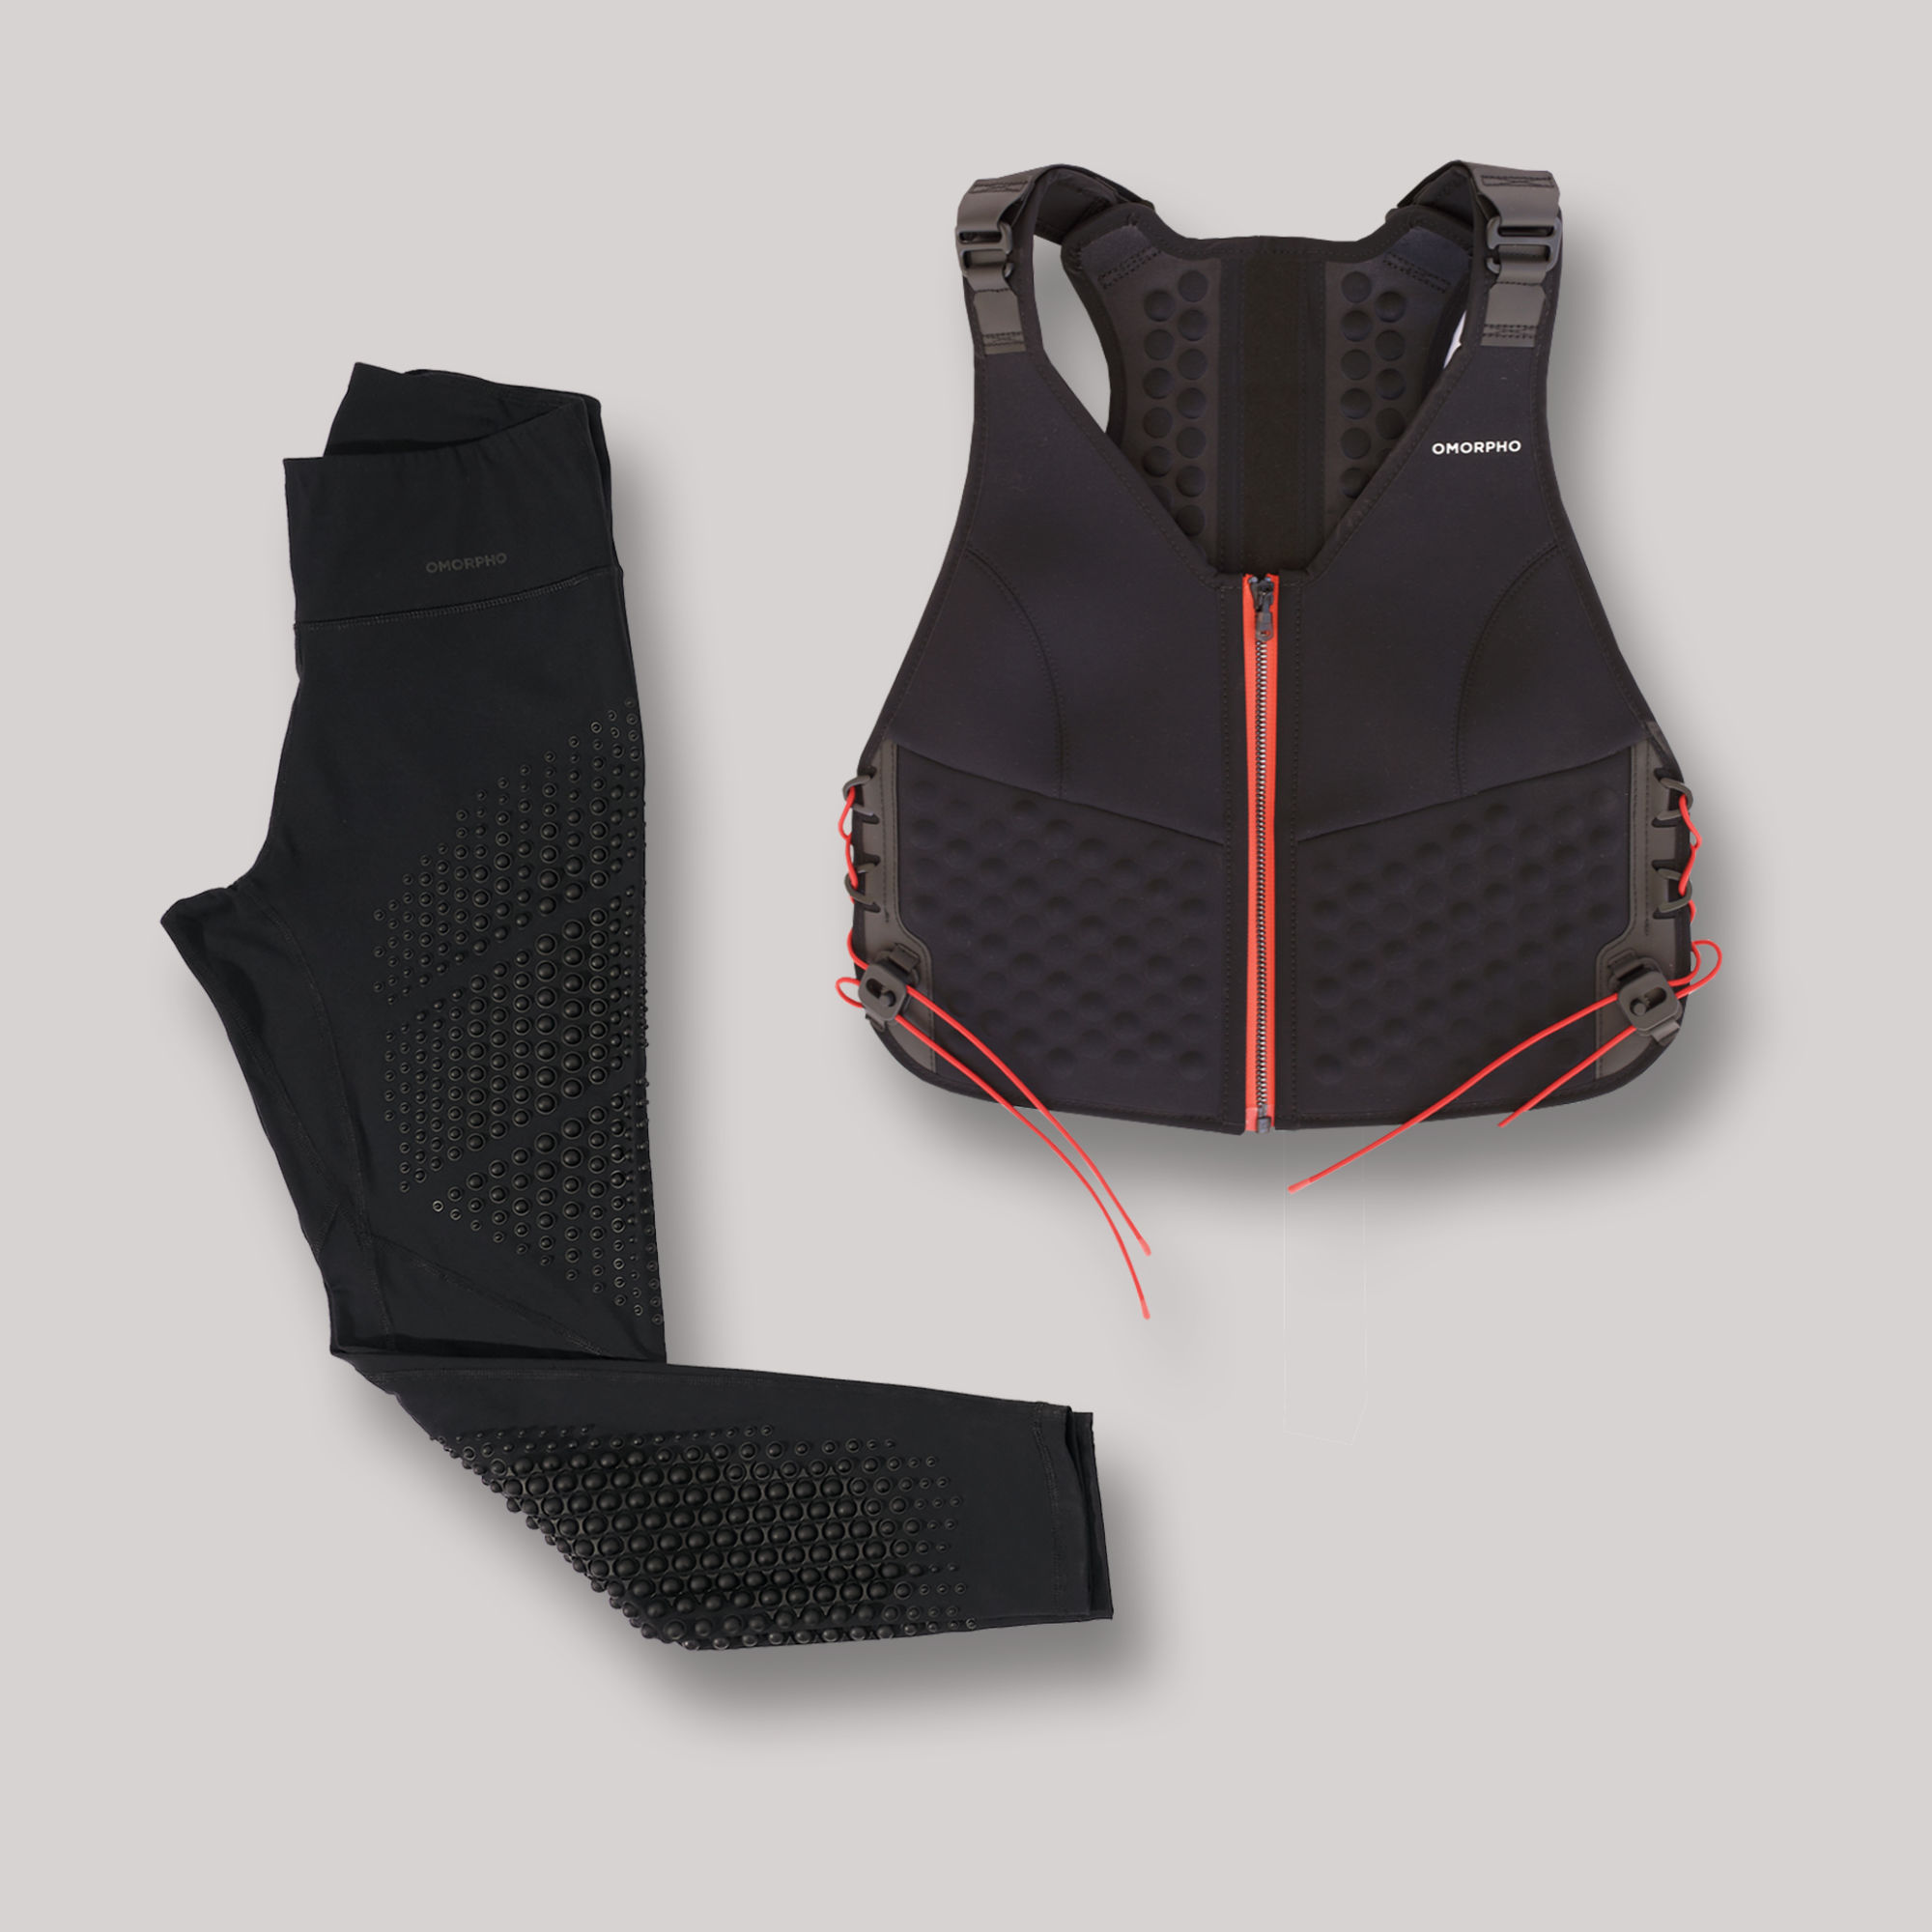 Laydown - OMORPHO W Speed  Bundle- G-Vest Sport and G-Tight, weighted vest for women